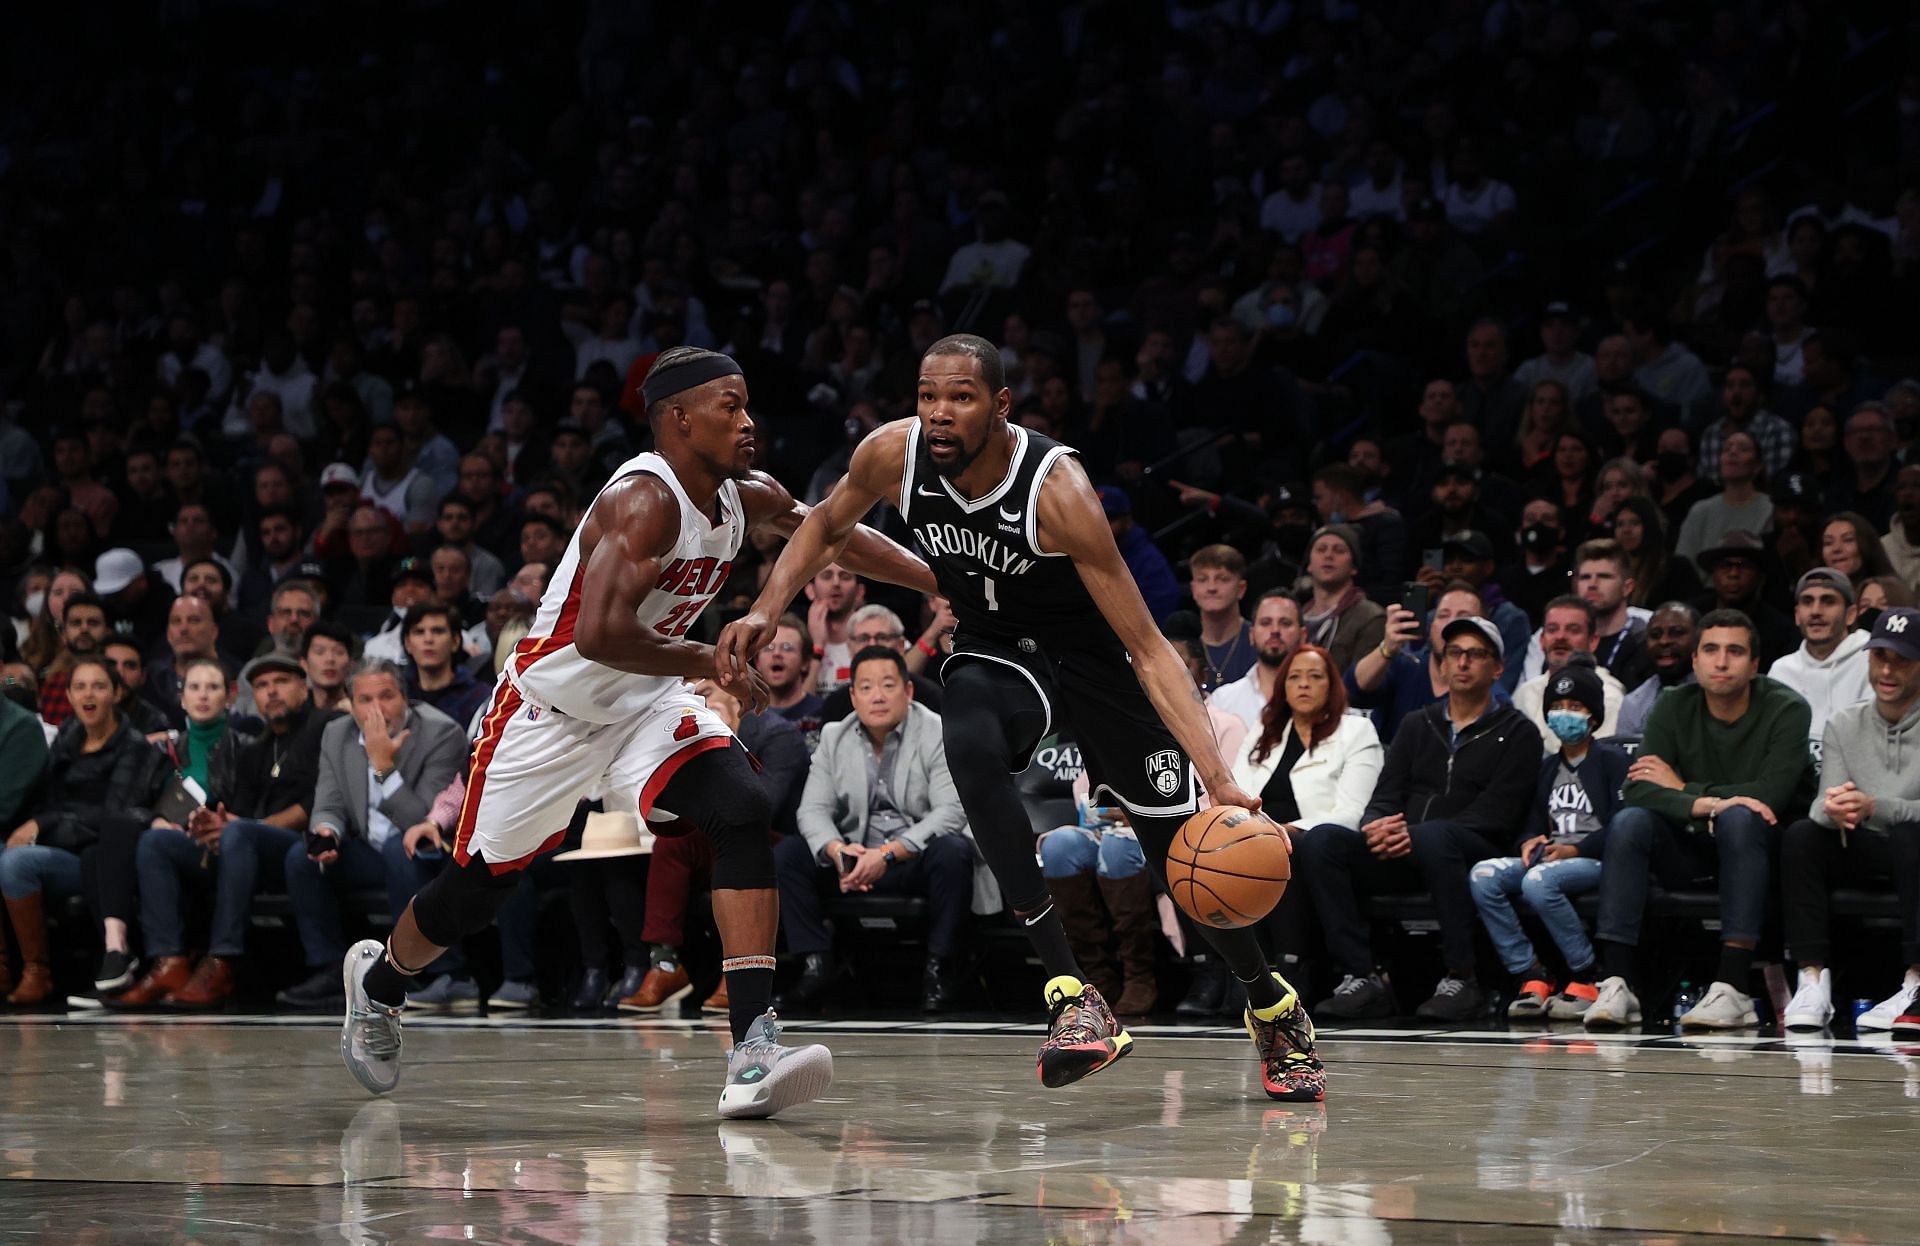 Miami Heat will face the Brooklyn Nets at the Barclays Center on Thursday.